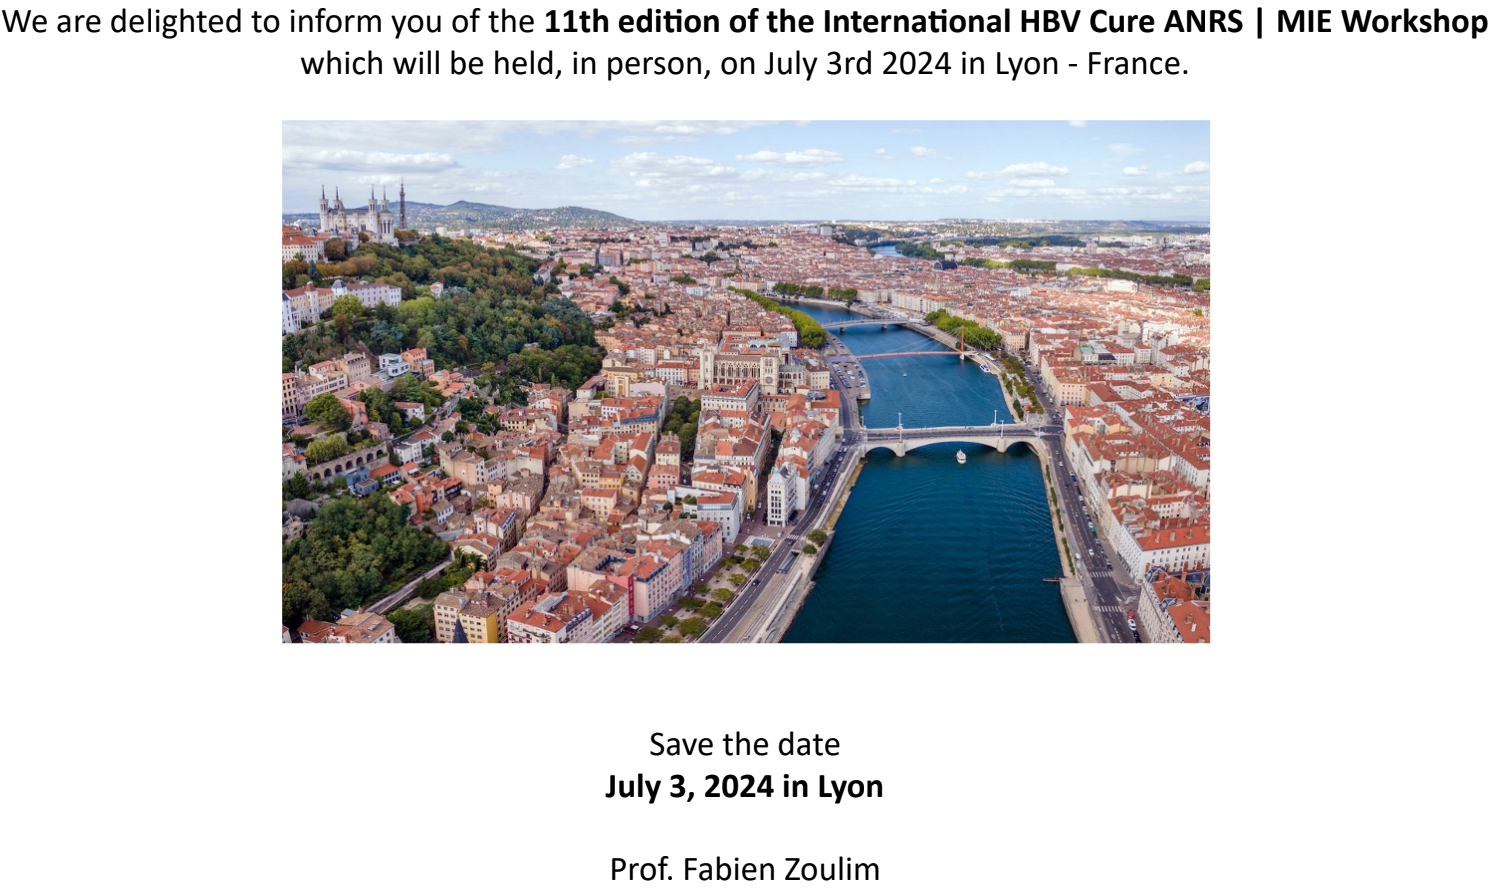 11th International HBV Cure ANRS | MIE Workshop – Wednesday, July 3rd, 2024